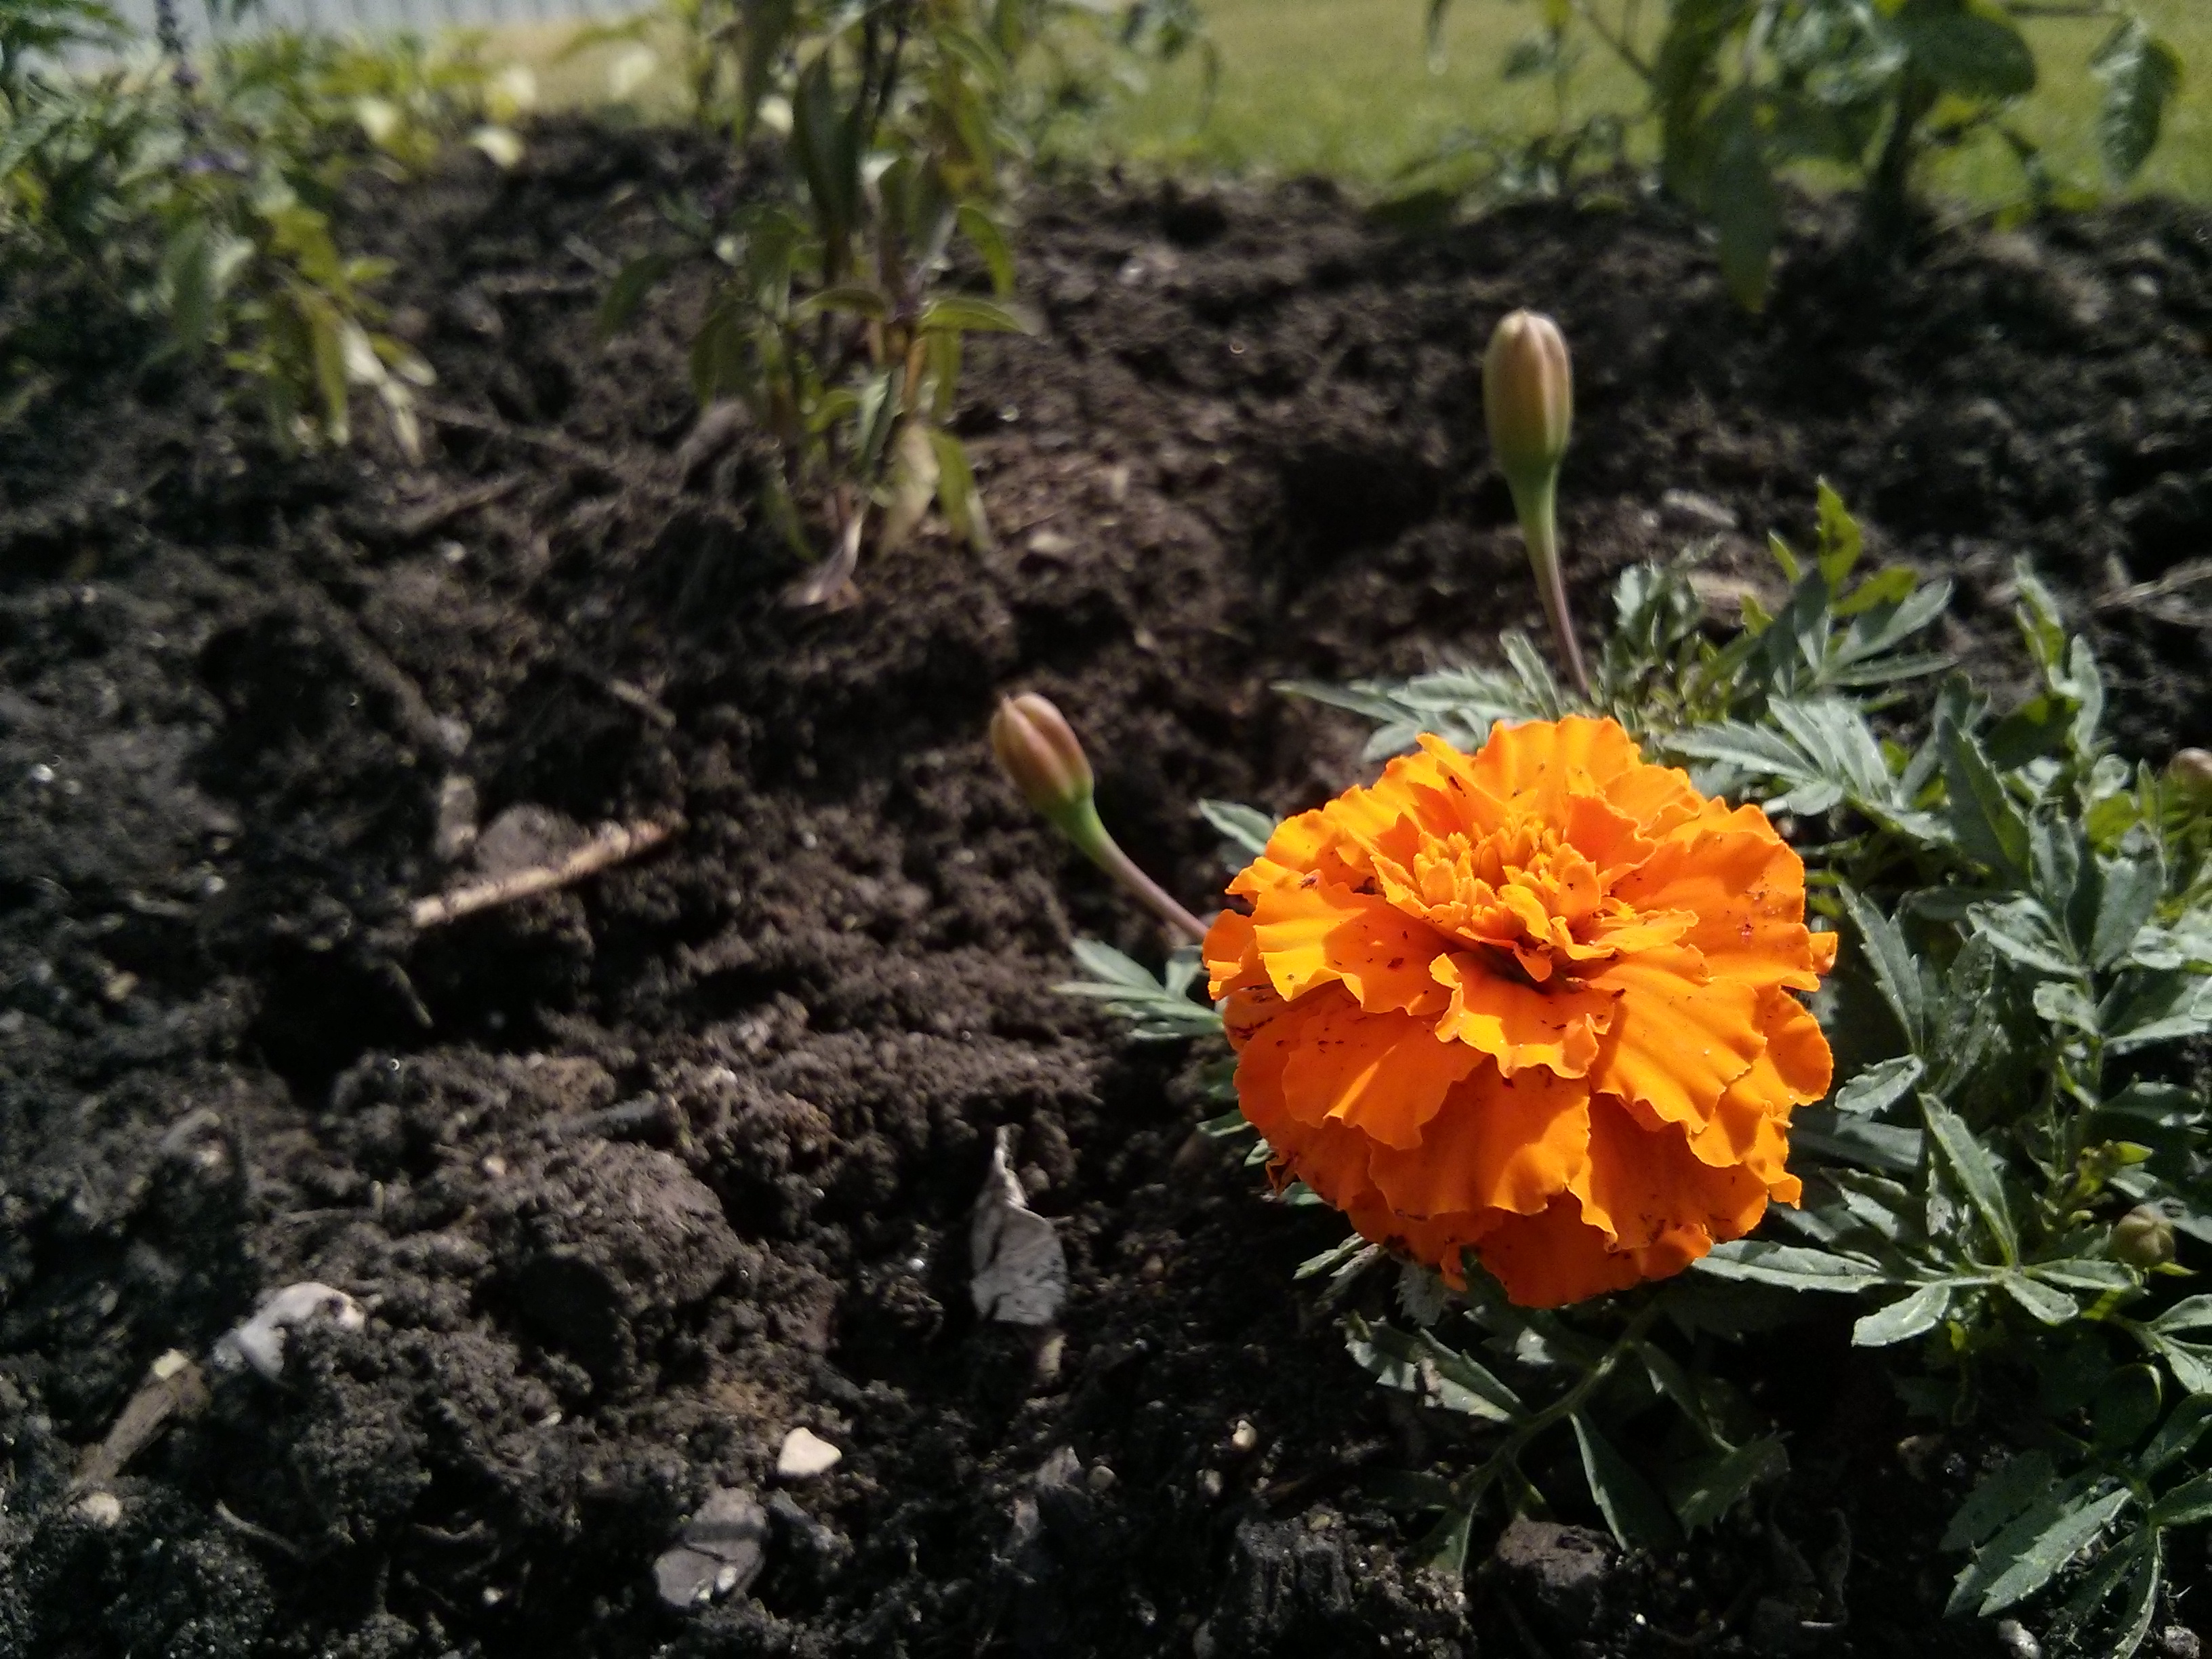 Marigolds growing at the USB Community Garden